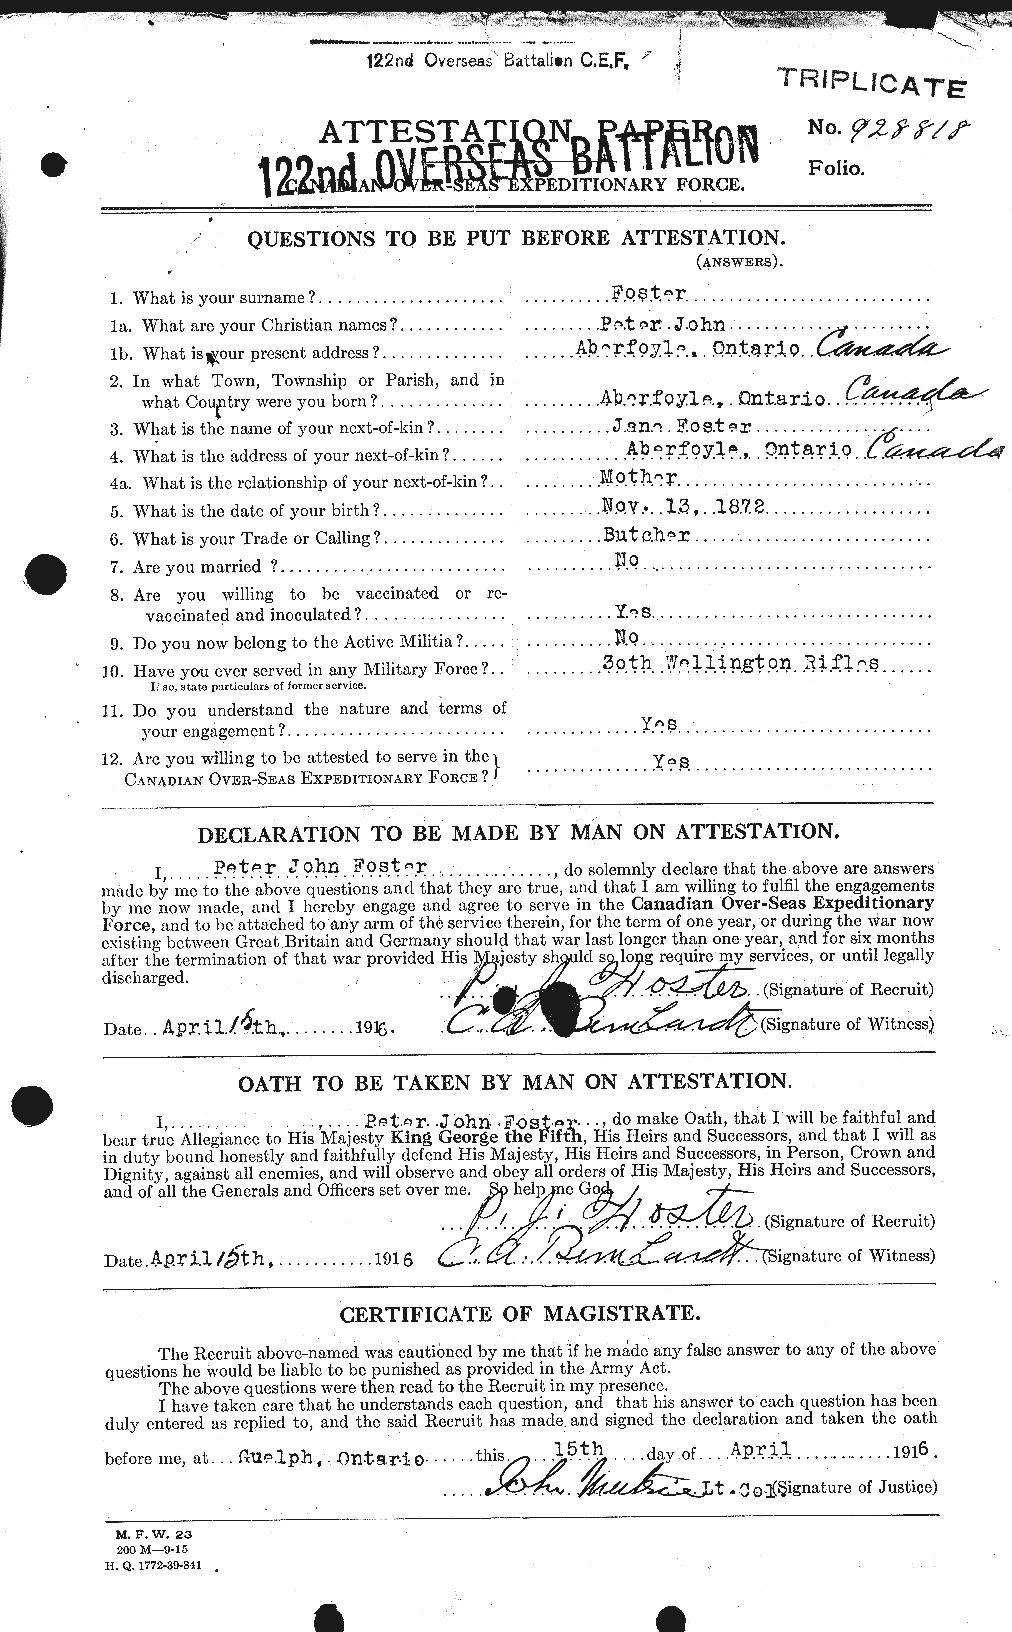 Personnel Records of the First World War - CEF 333445a